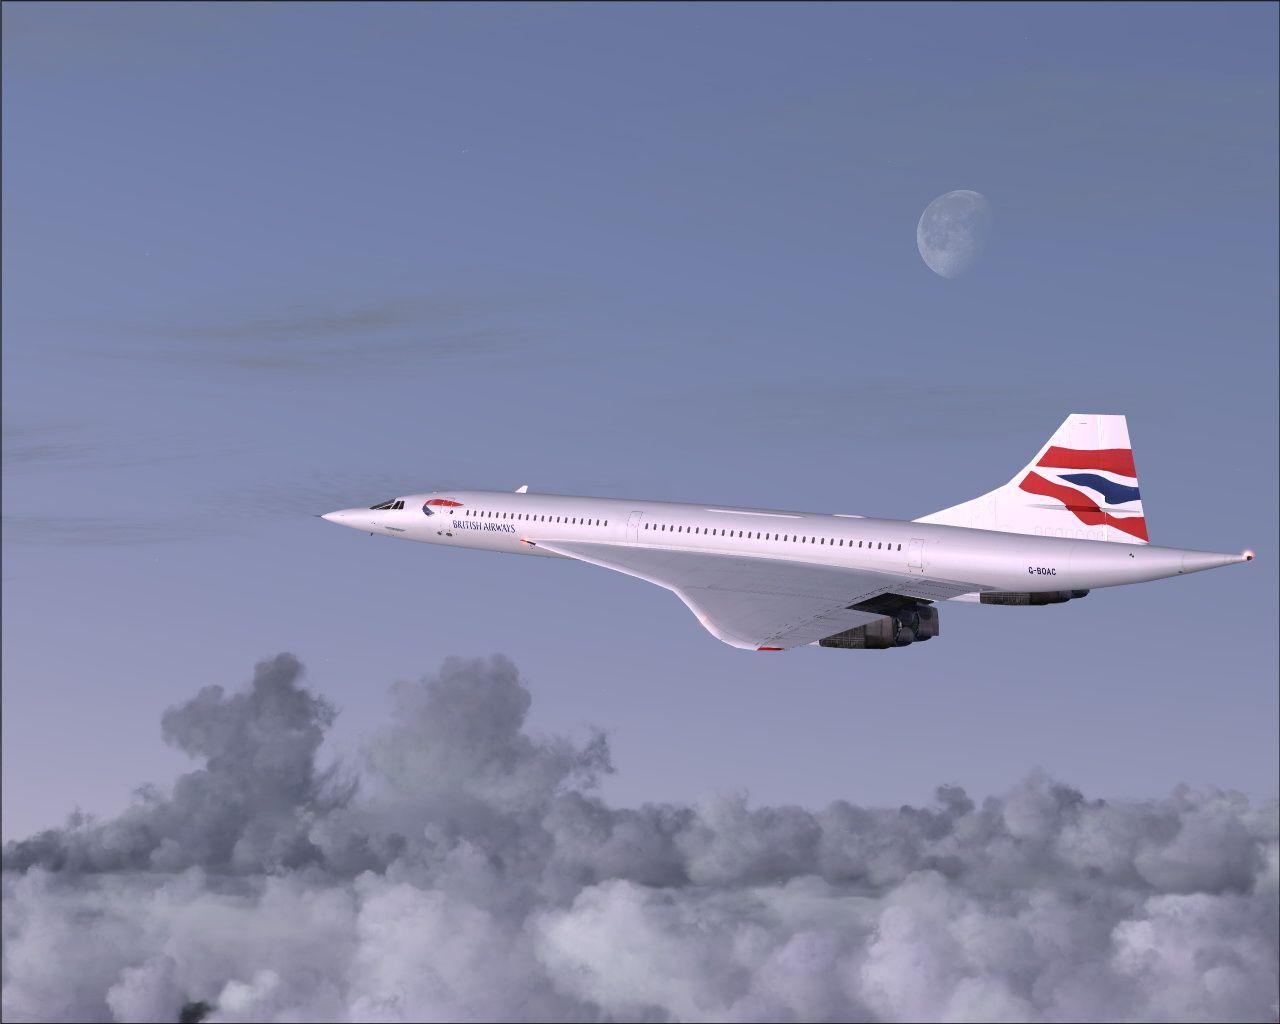 The Concorde, owned by British Airways, the fastest commercial jet